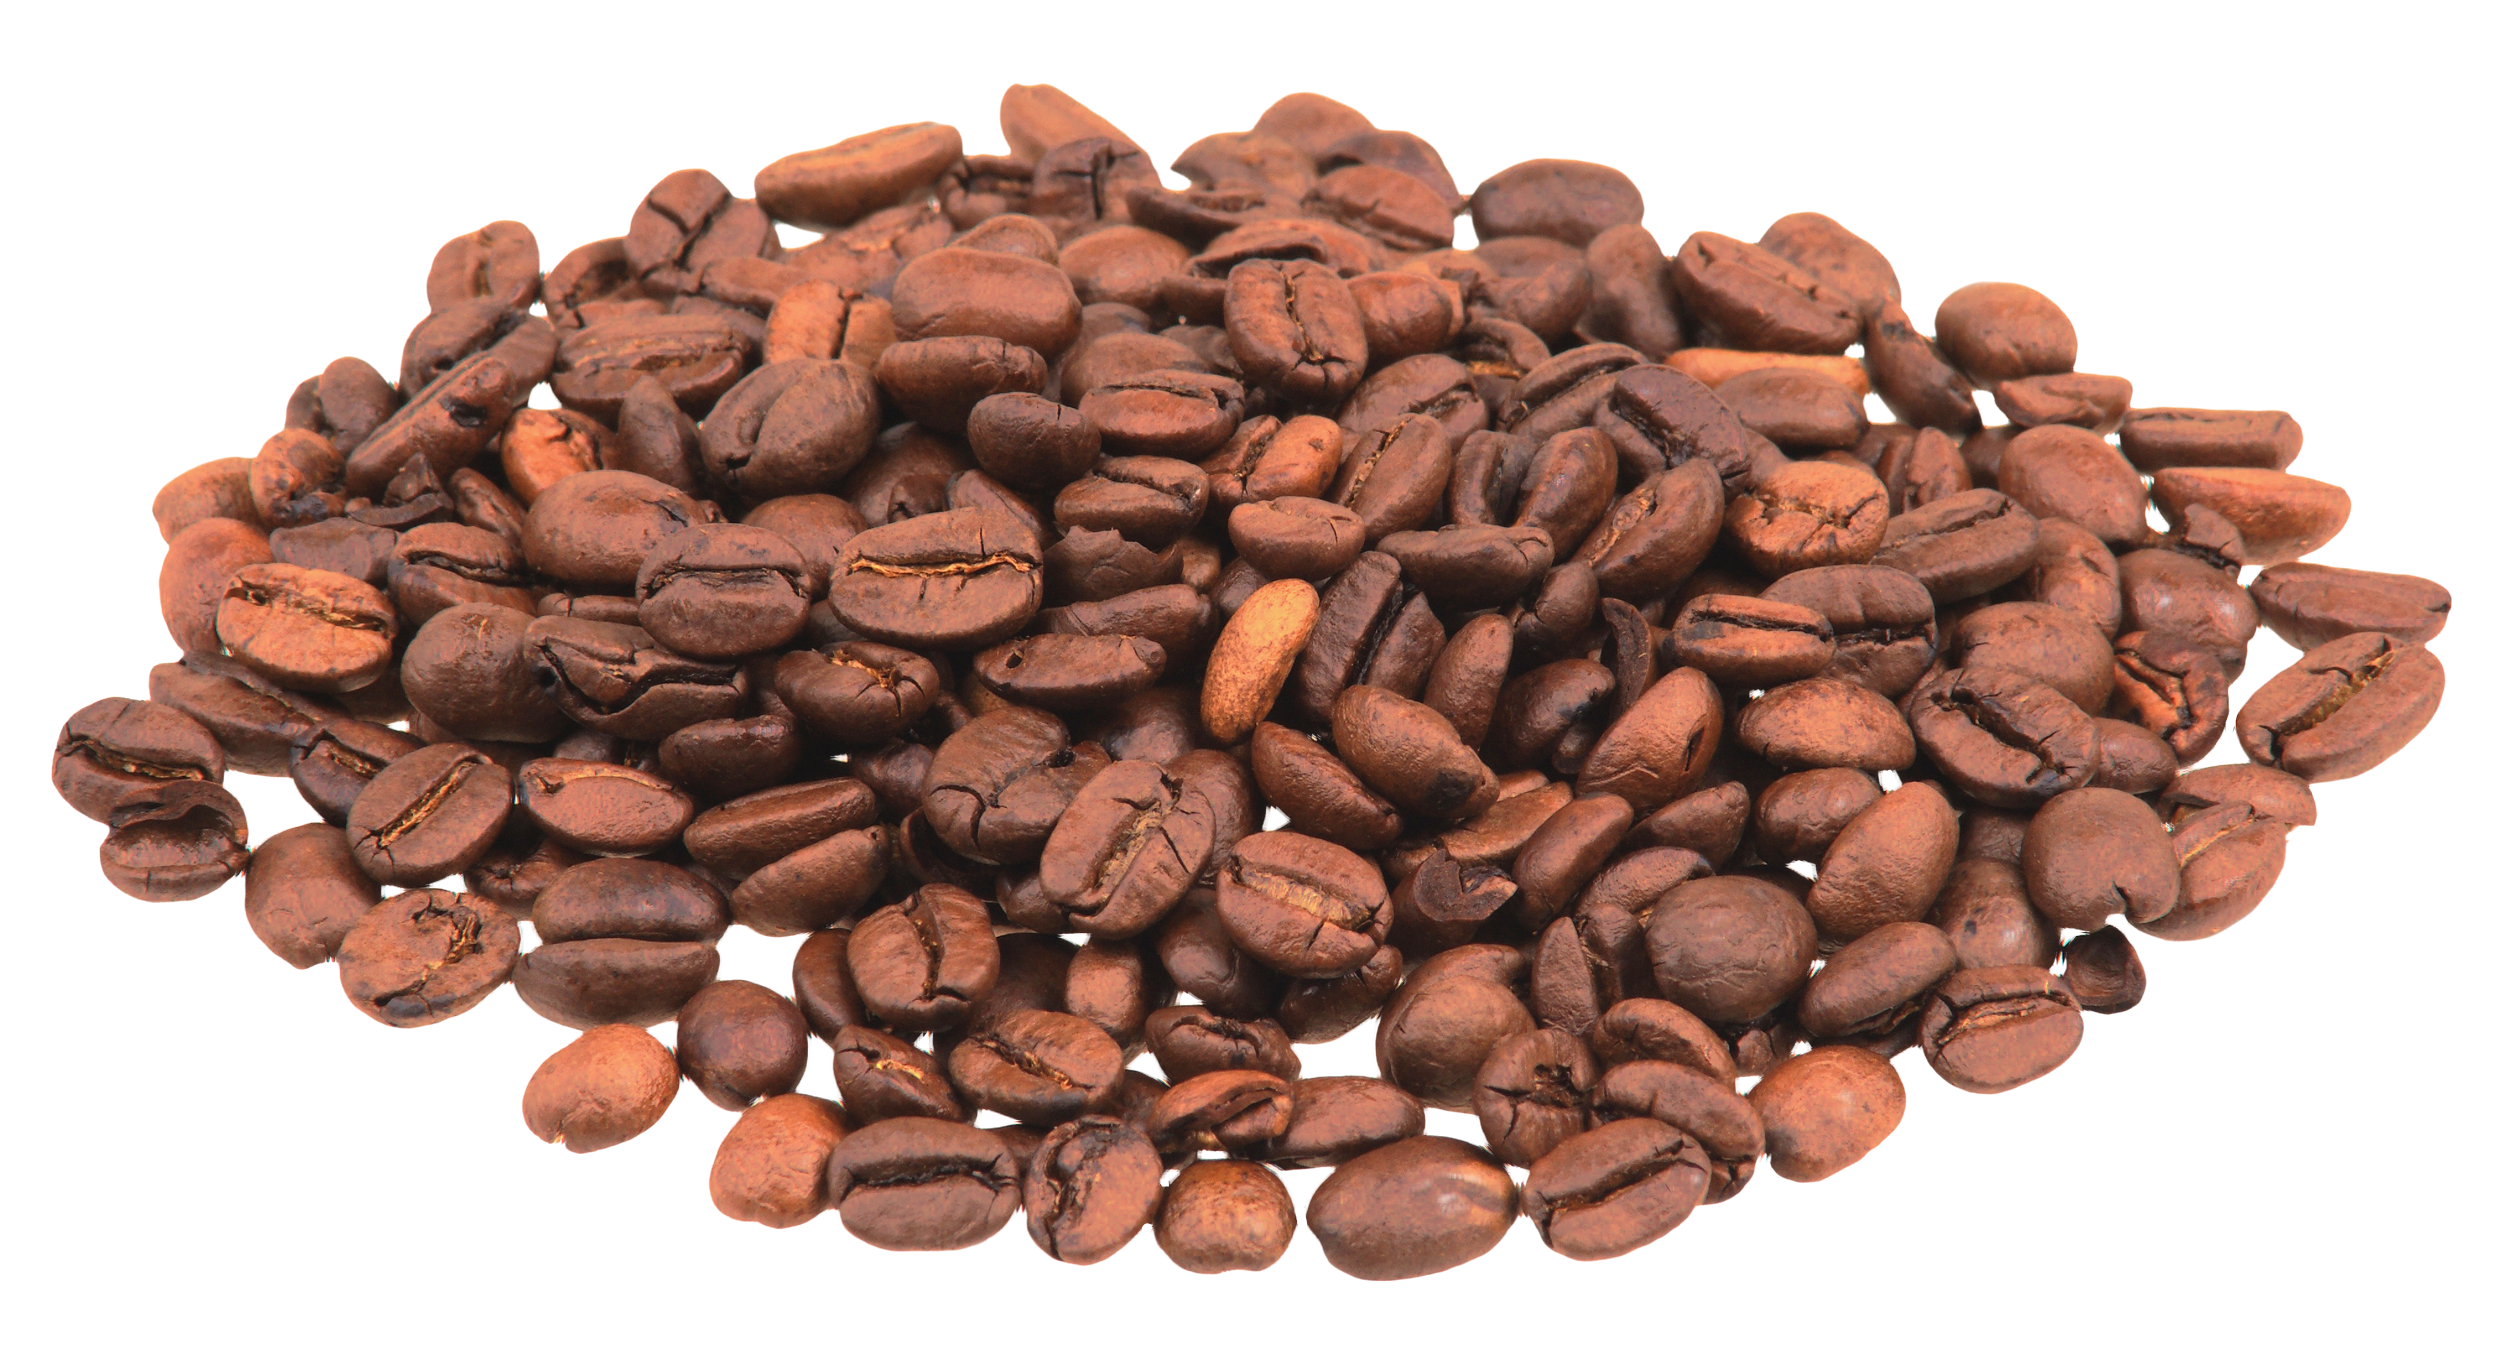 Hdpng - Coffee Beans, Transparent background PNG HD thumbnail